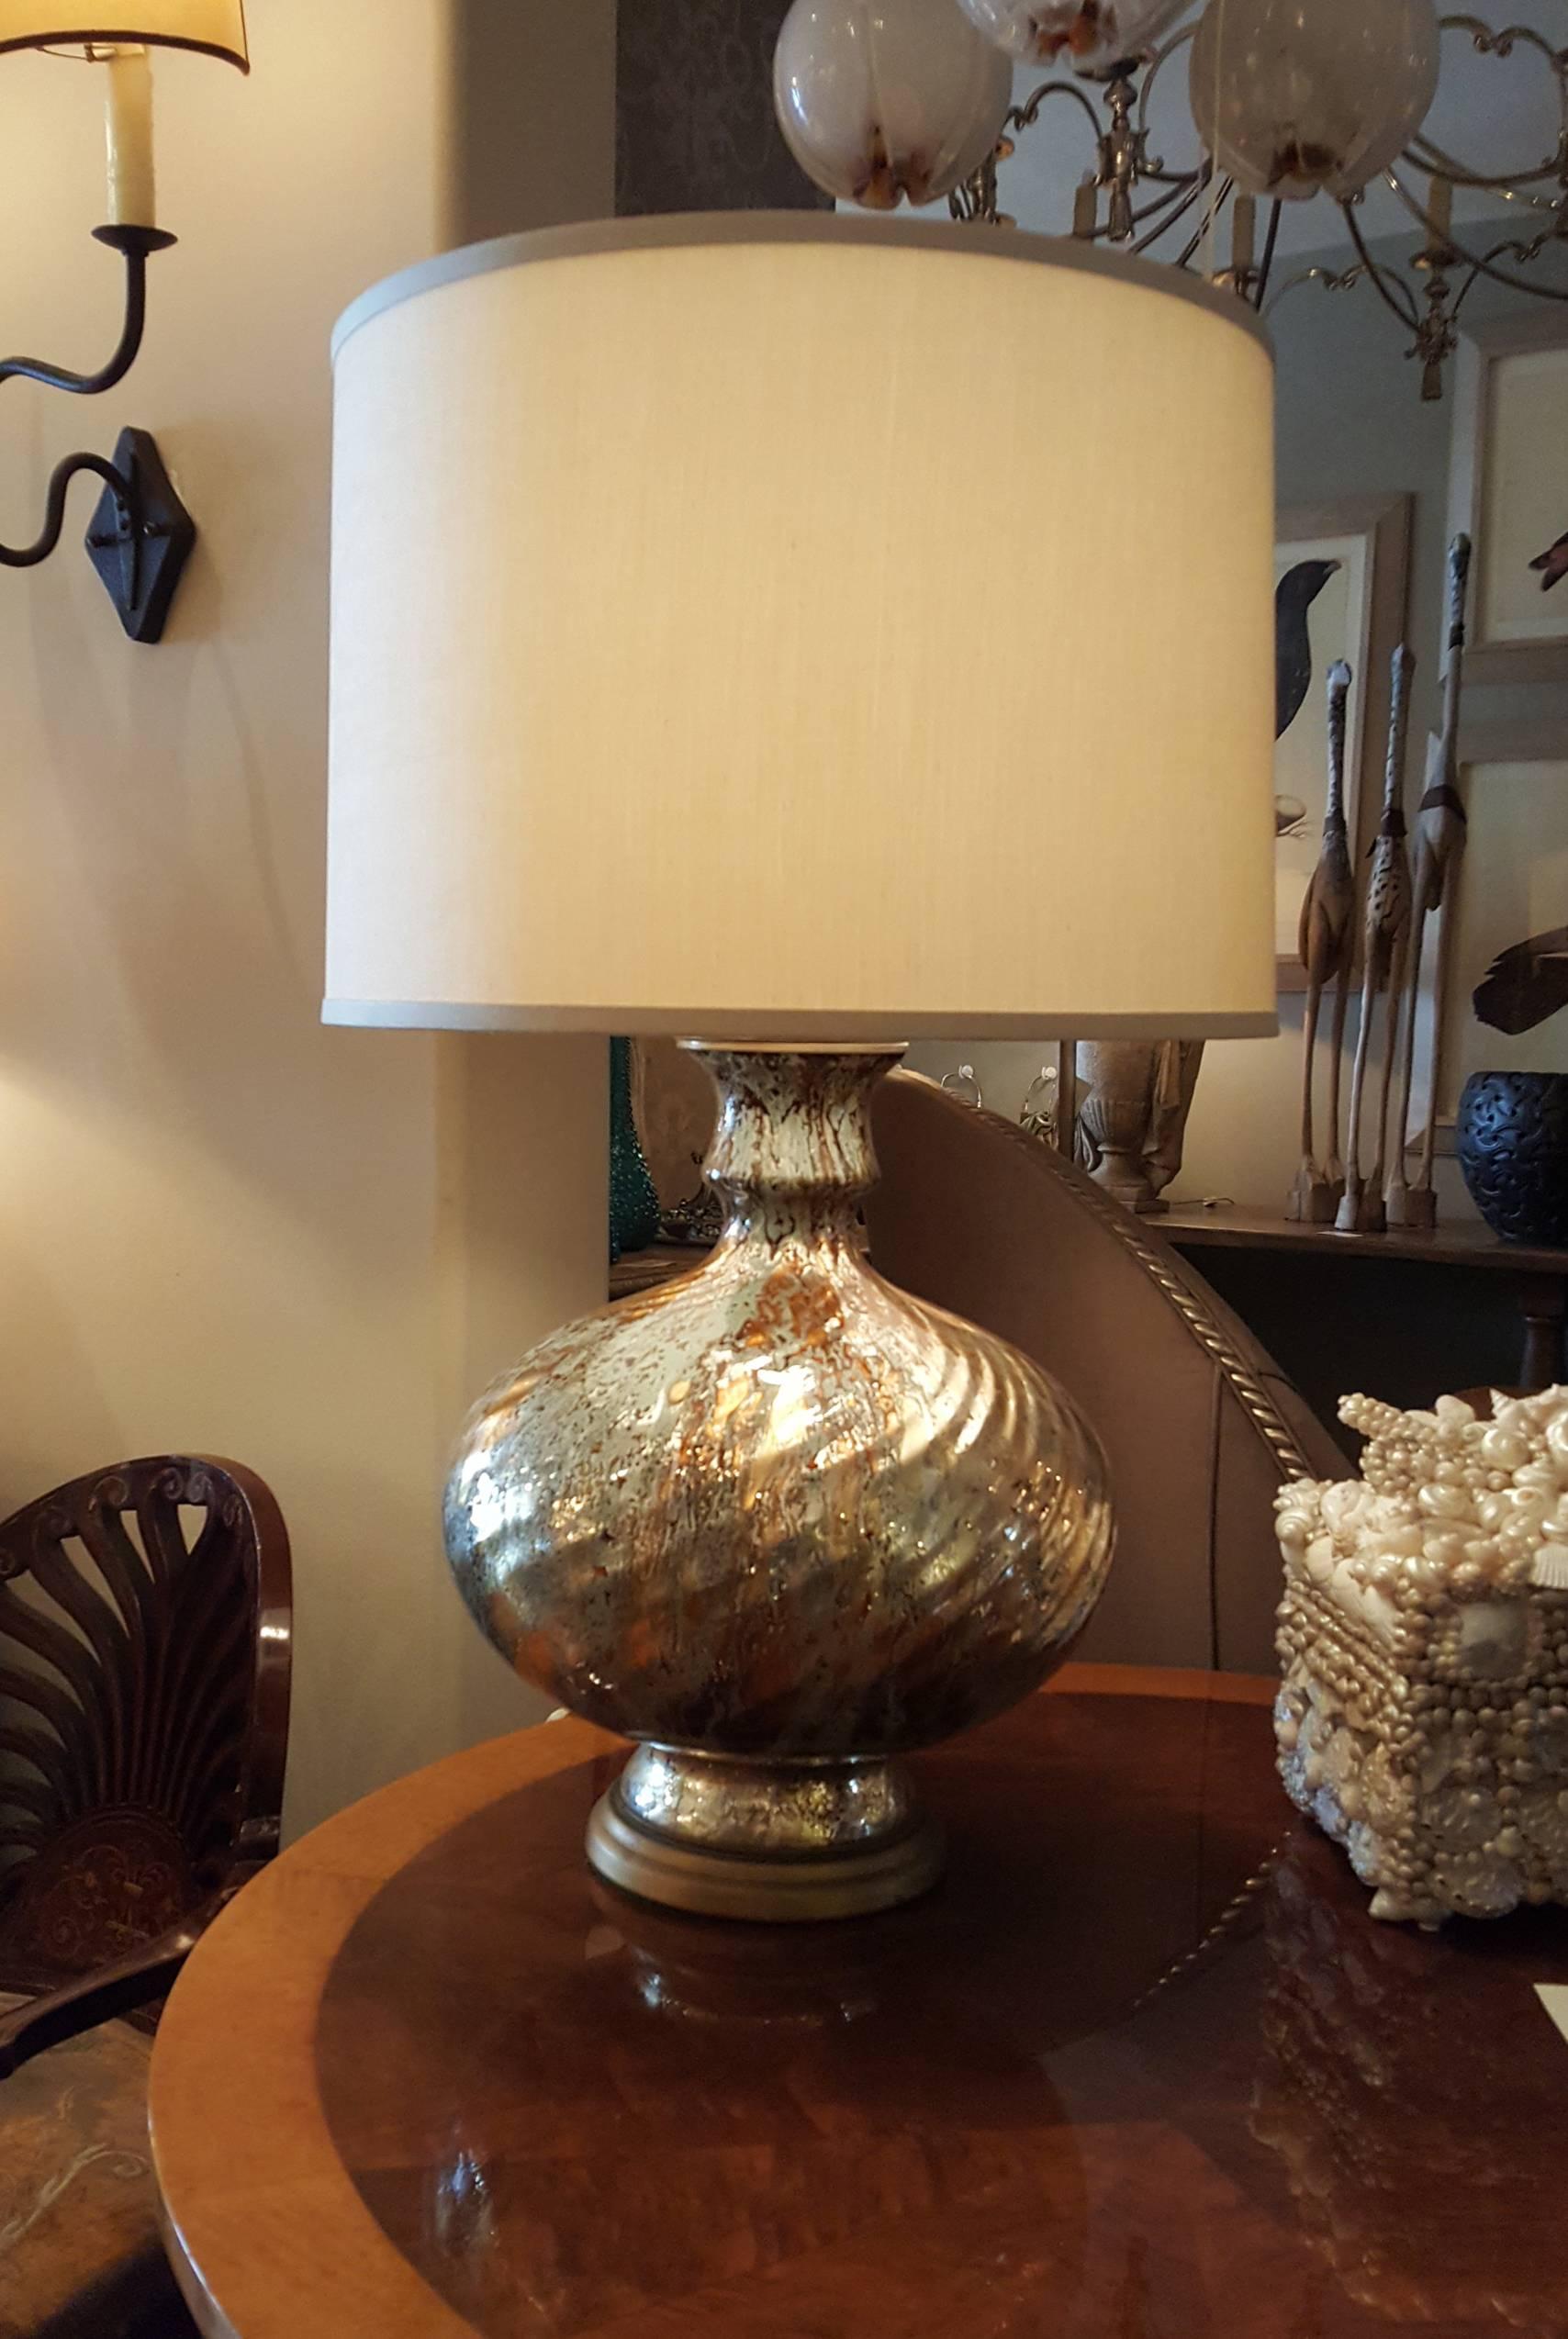 Generously proportioned mercury glass lamp with swirled base and new silk shade. Gold and copper colors exist in the mercury glass. Gold colored base. Believed to be from the 1960s. 

Measures: Shade top diameter: 19